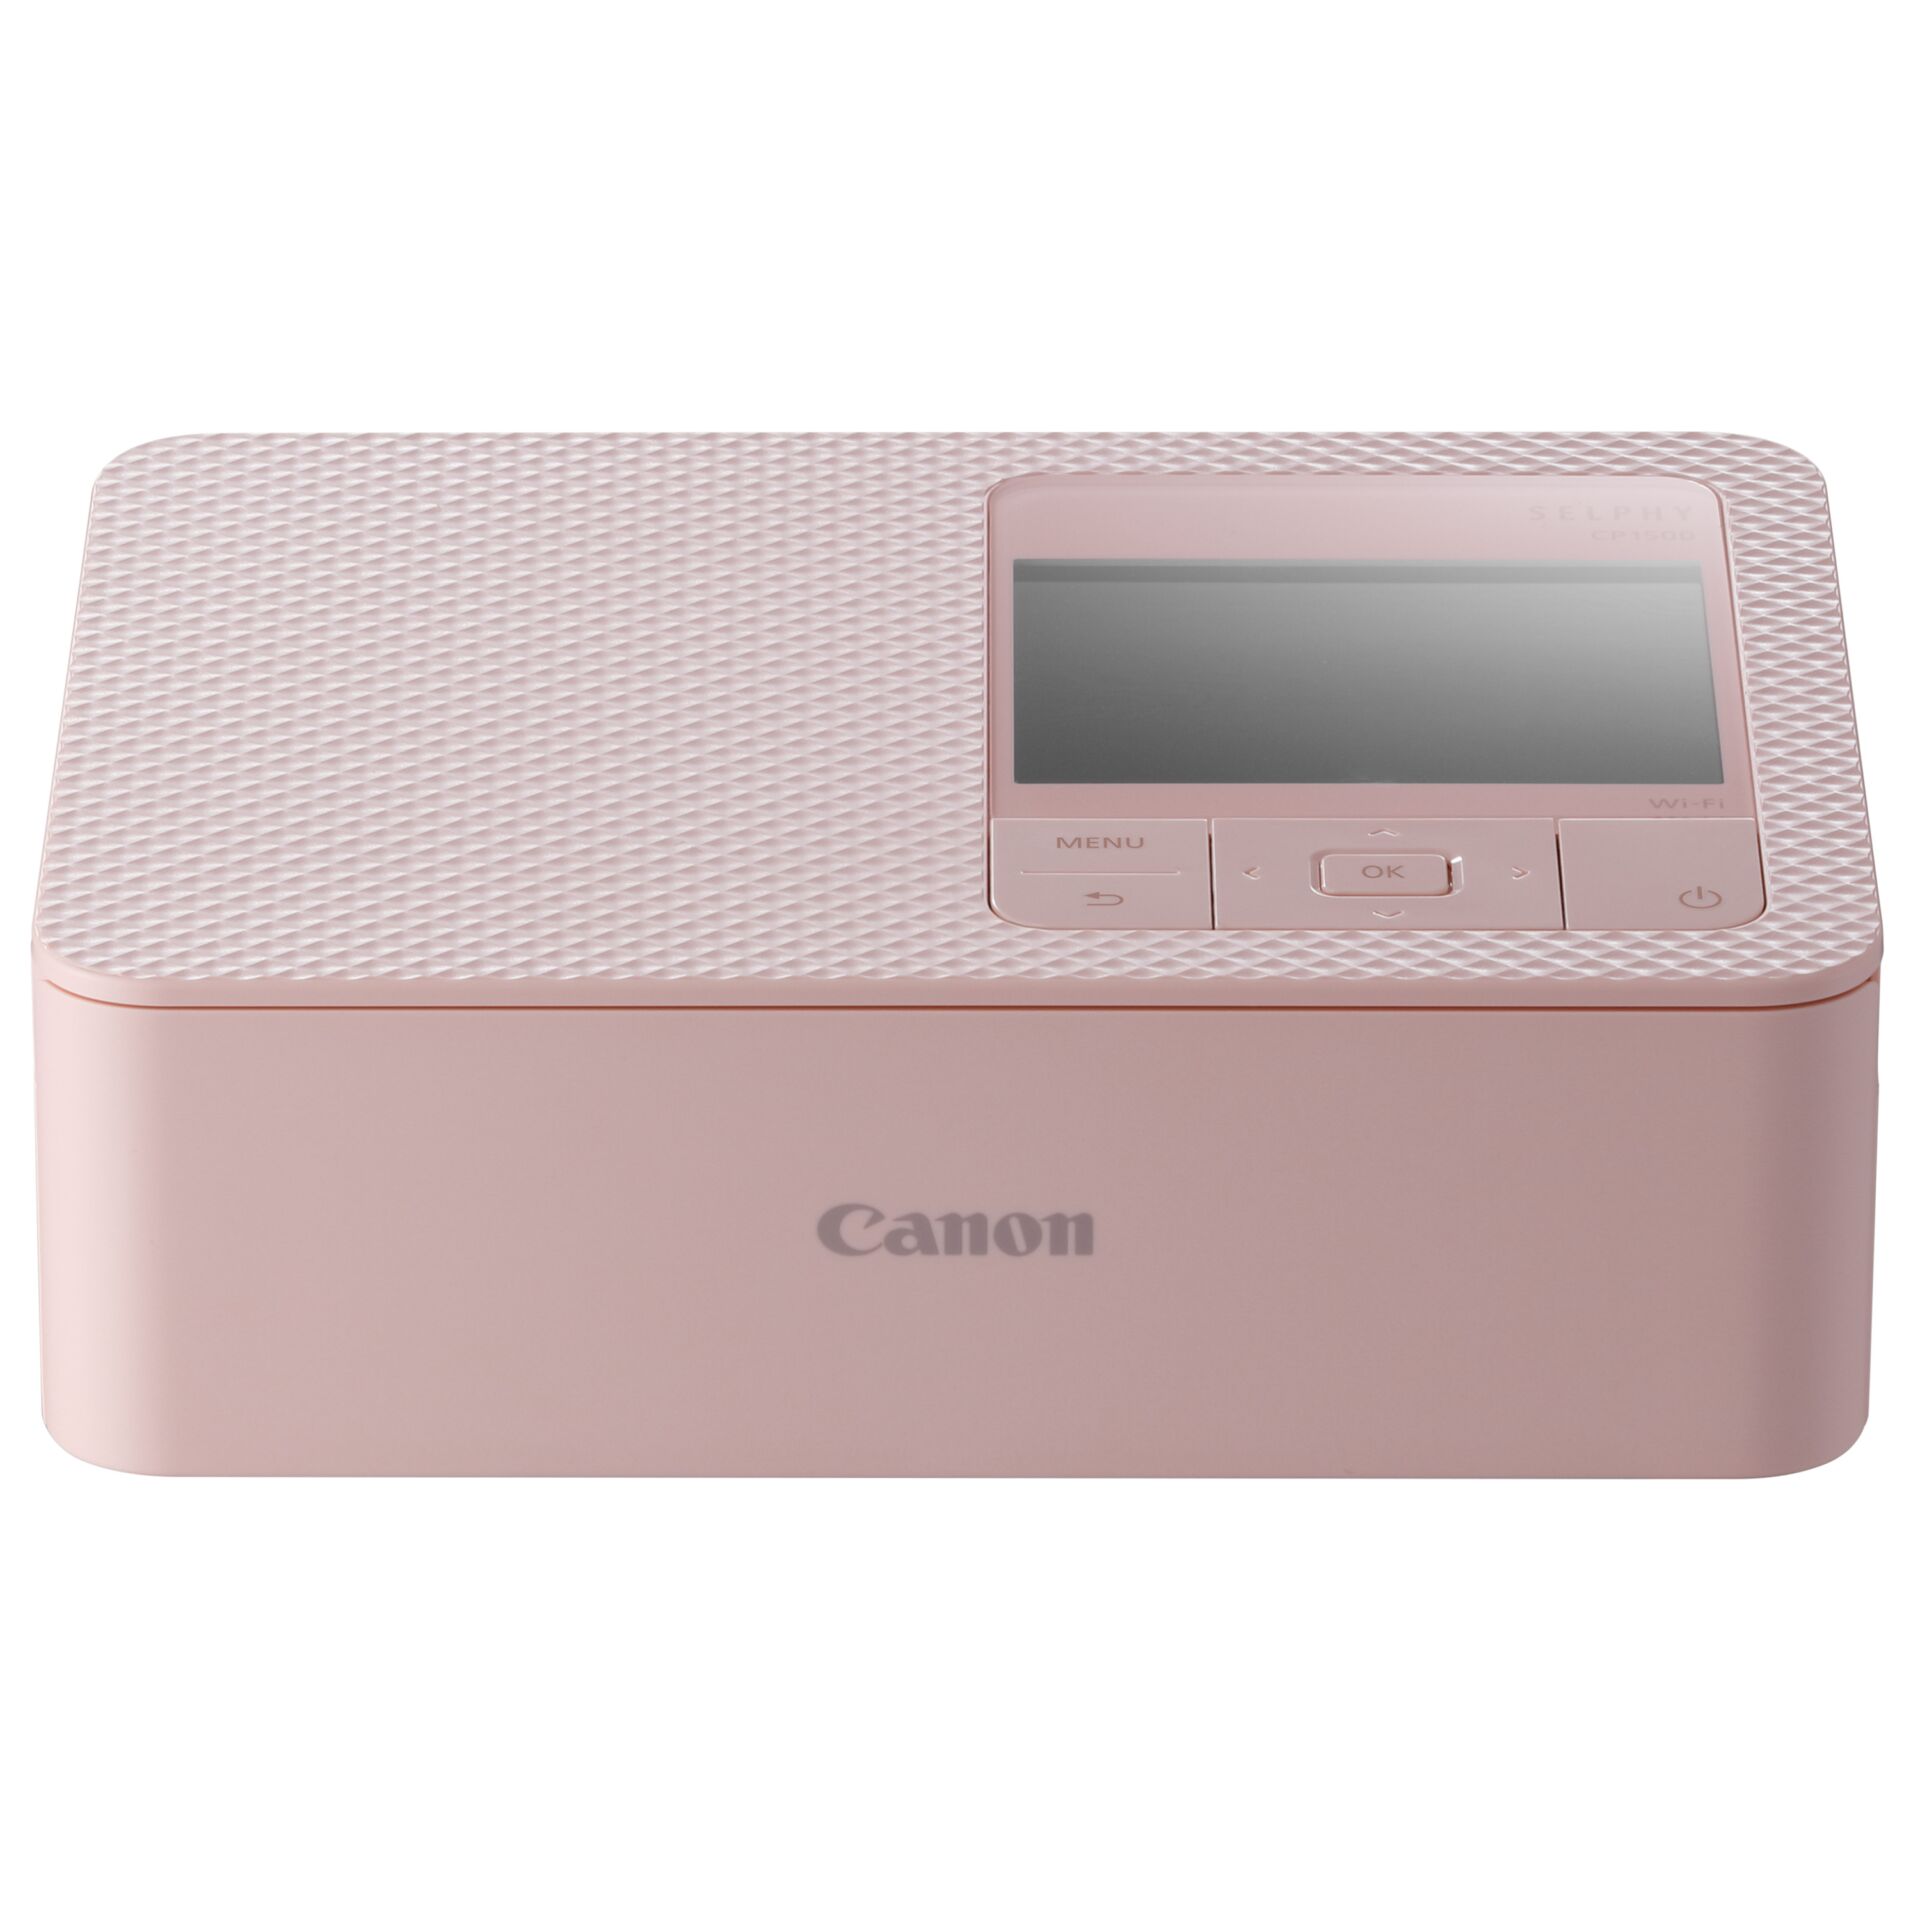 Canon Selphy CP 1500 pink